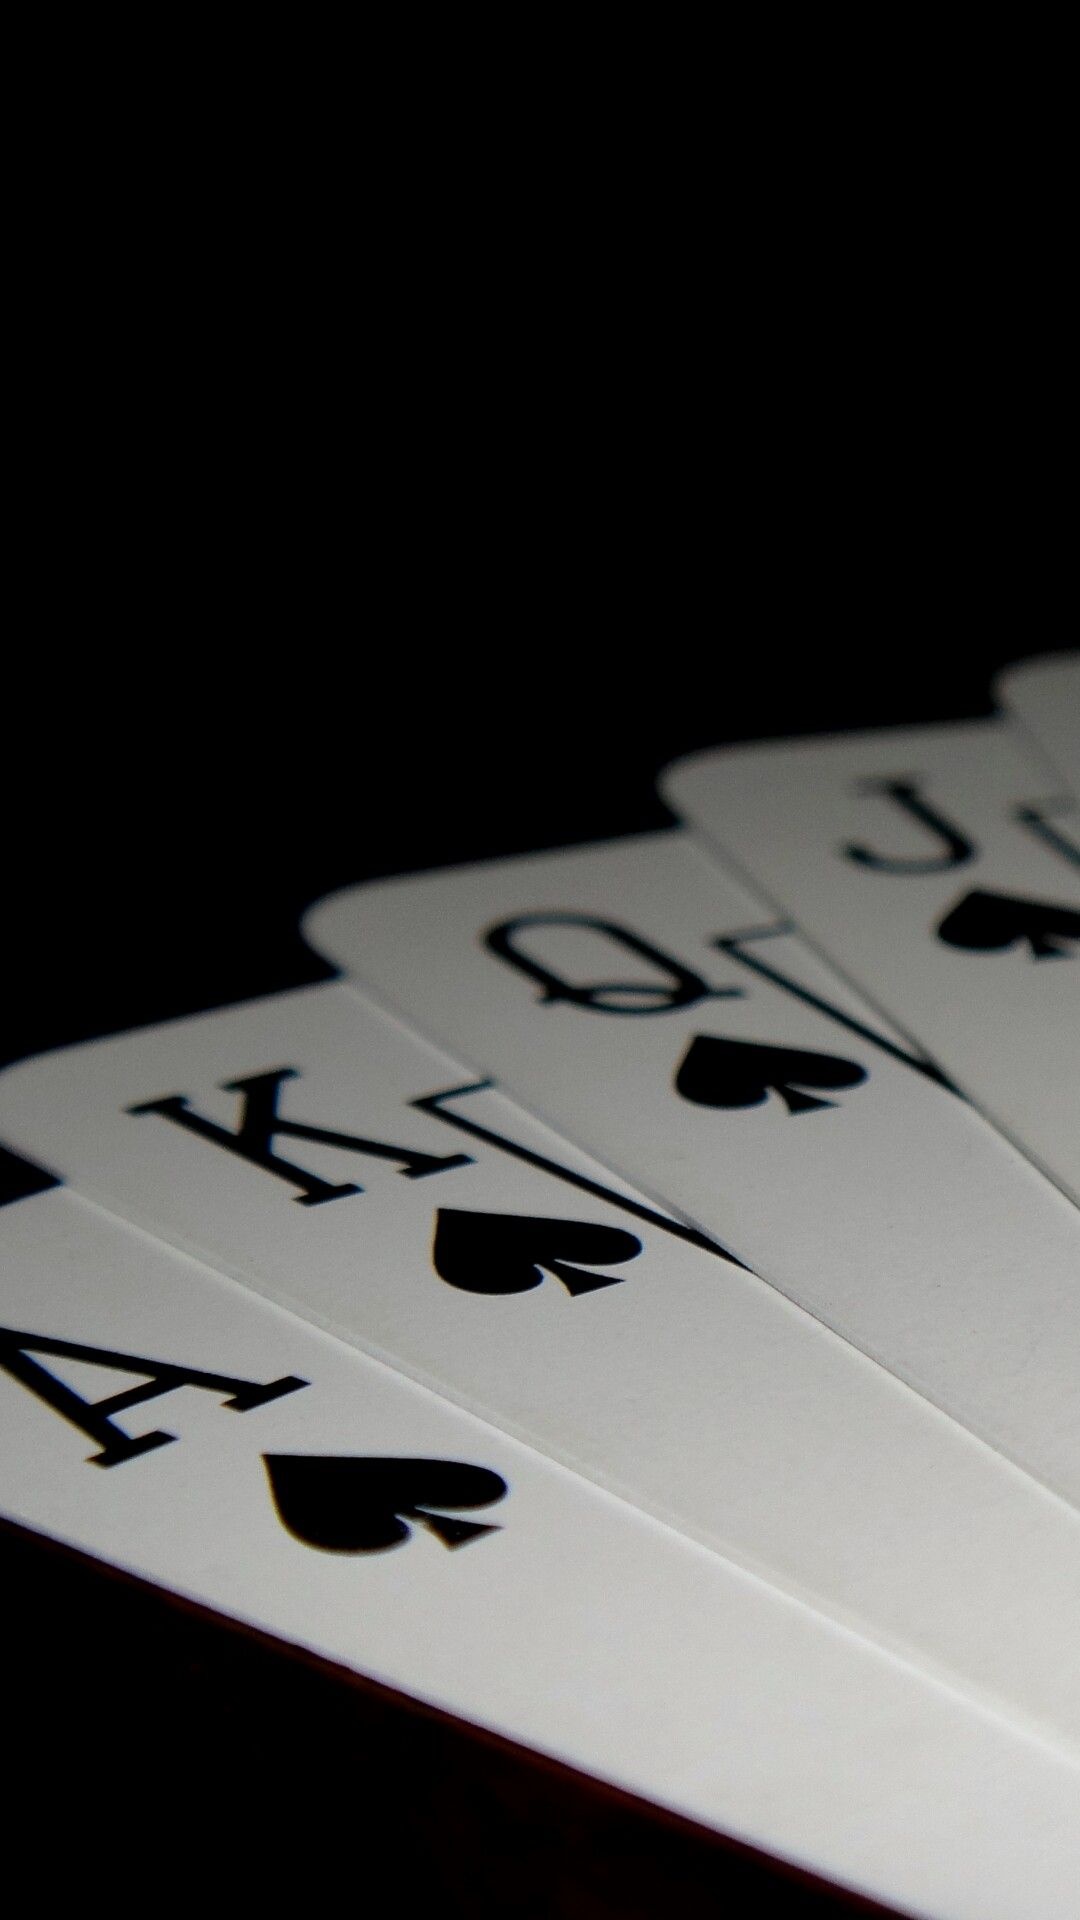 Poker: Minimalistic, Gameplay, A royal flush, The highest straight of cards. 1080x1920 Full HD Background.